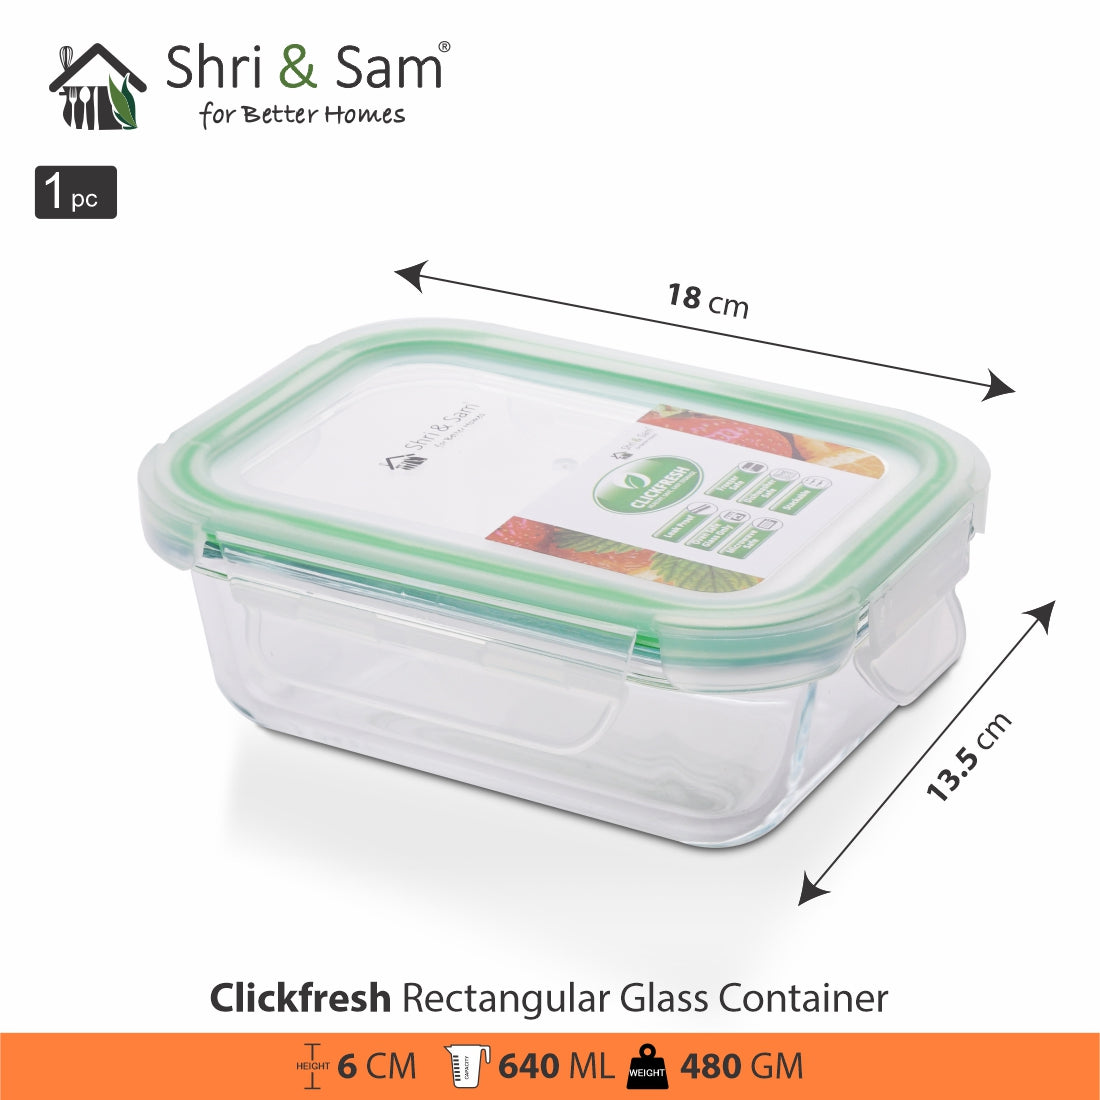 Glass 640ml Food Storage & Bakeware Container with Airtight Lid Rectangular Clickfresh